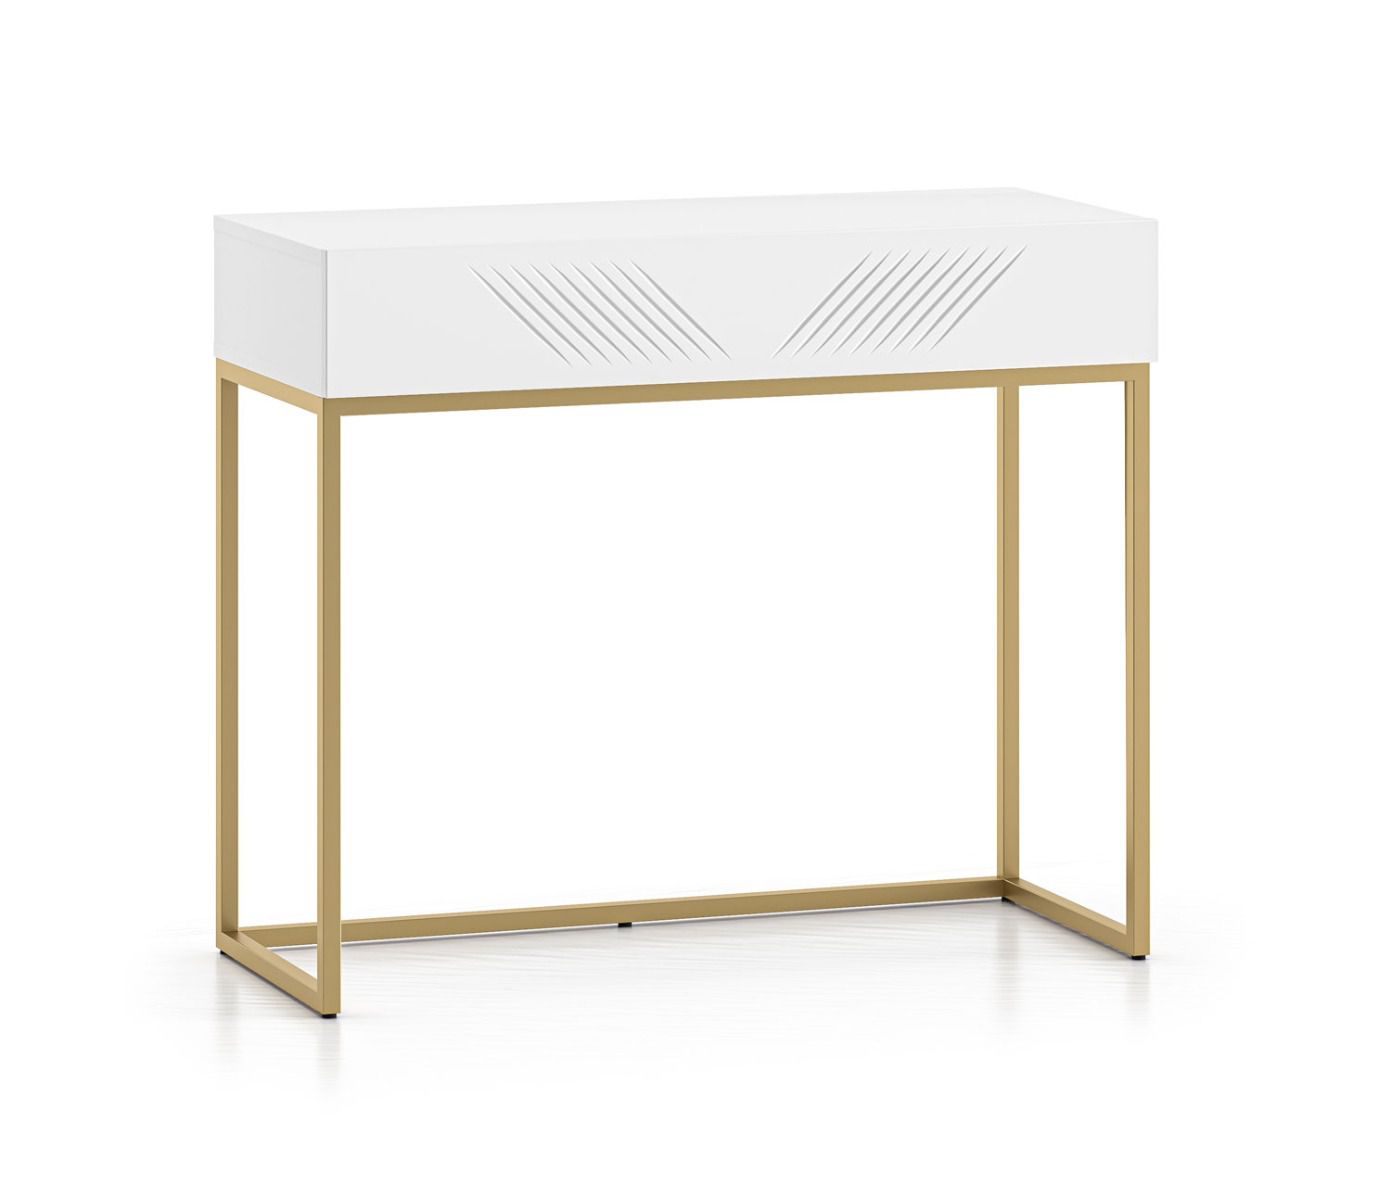 Elegant dressing table with one drawer Taos 22, with push-to-open function, color: white matt, dimensions: 78 x 92 x 40 cm, legs: gold, soft-close system